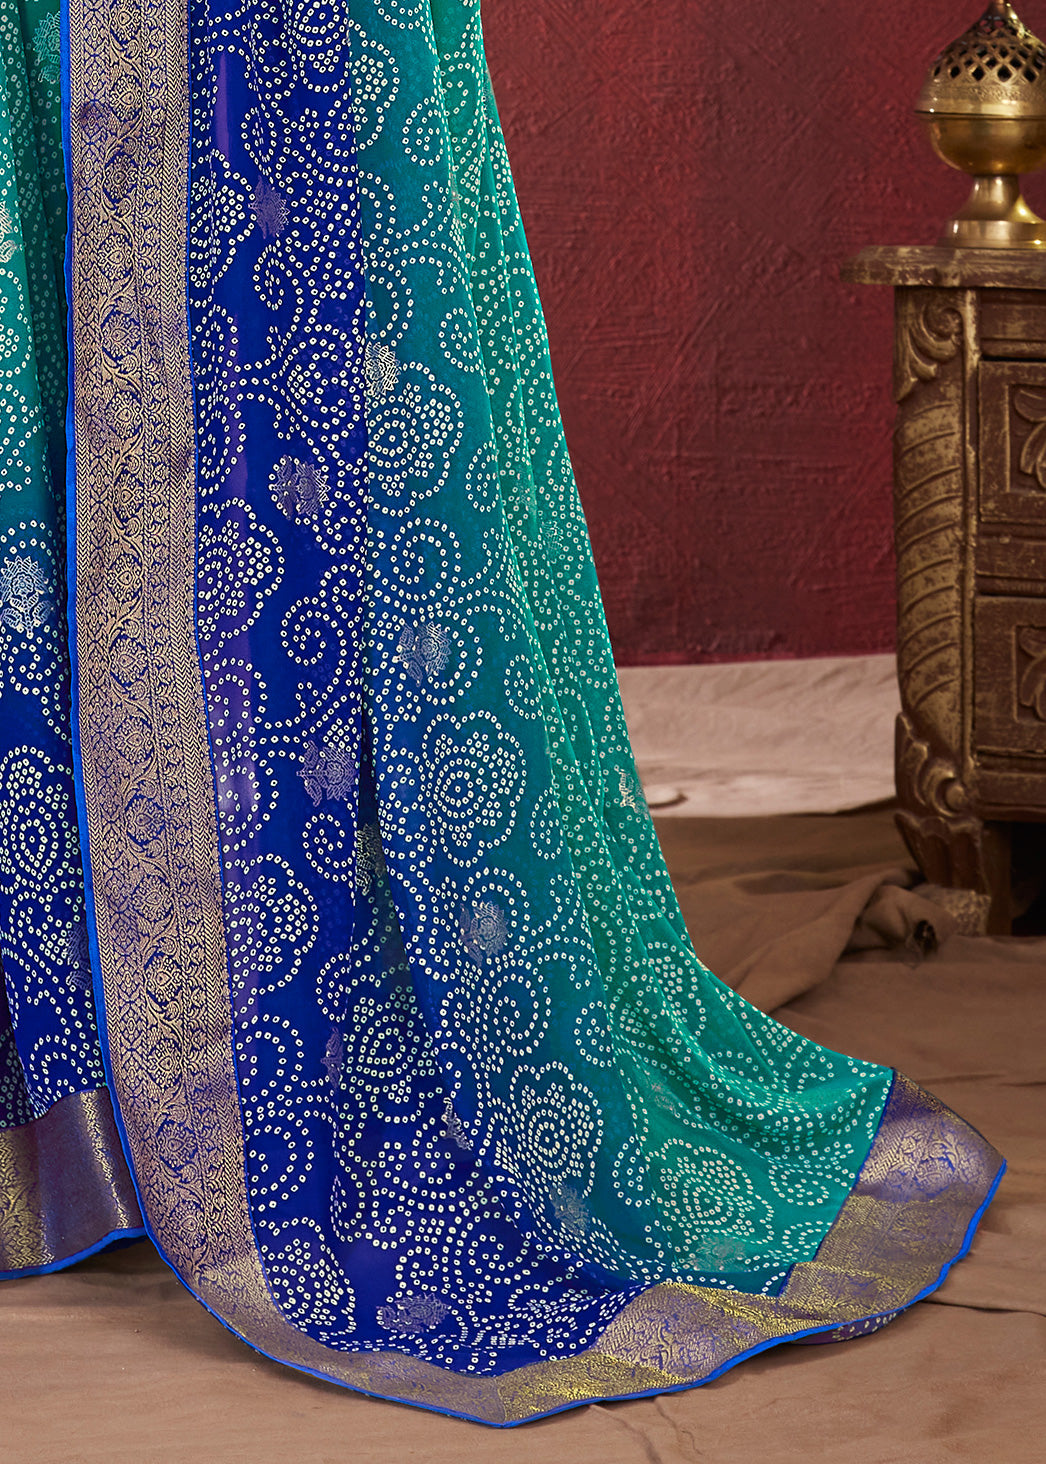 Dual Shades Bandhani Printed Royal Blue Weightless Georgette Saree With Embroidery Lace